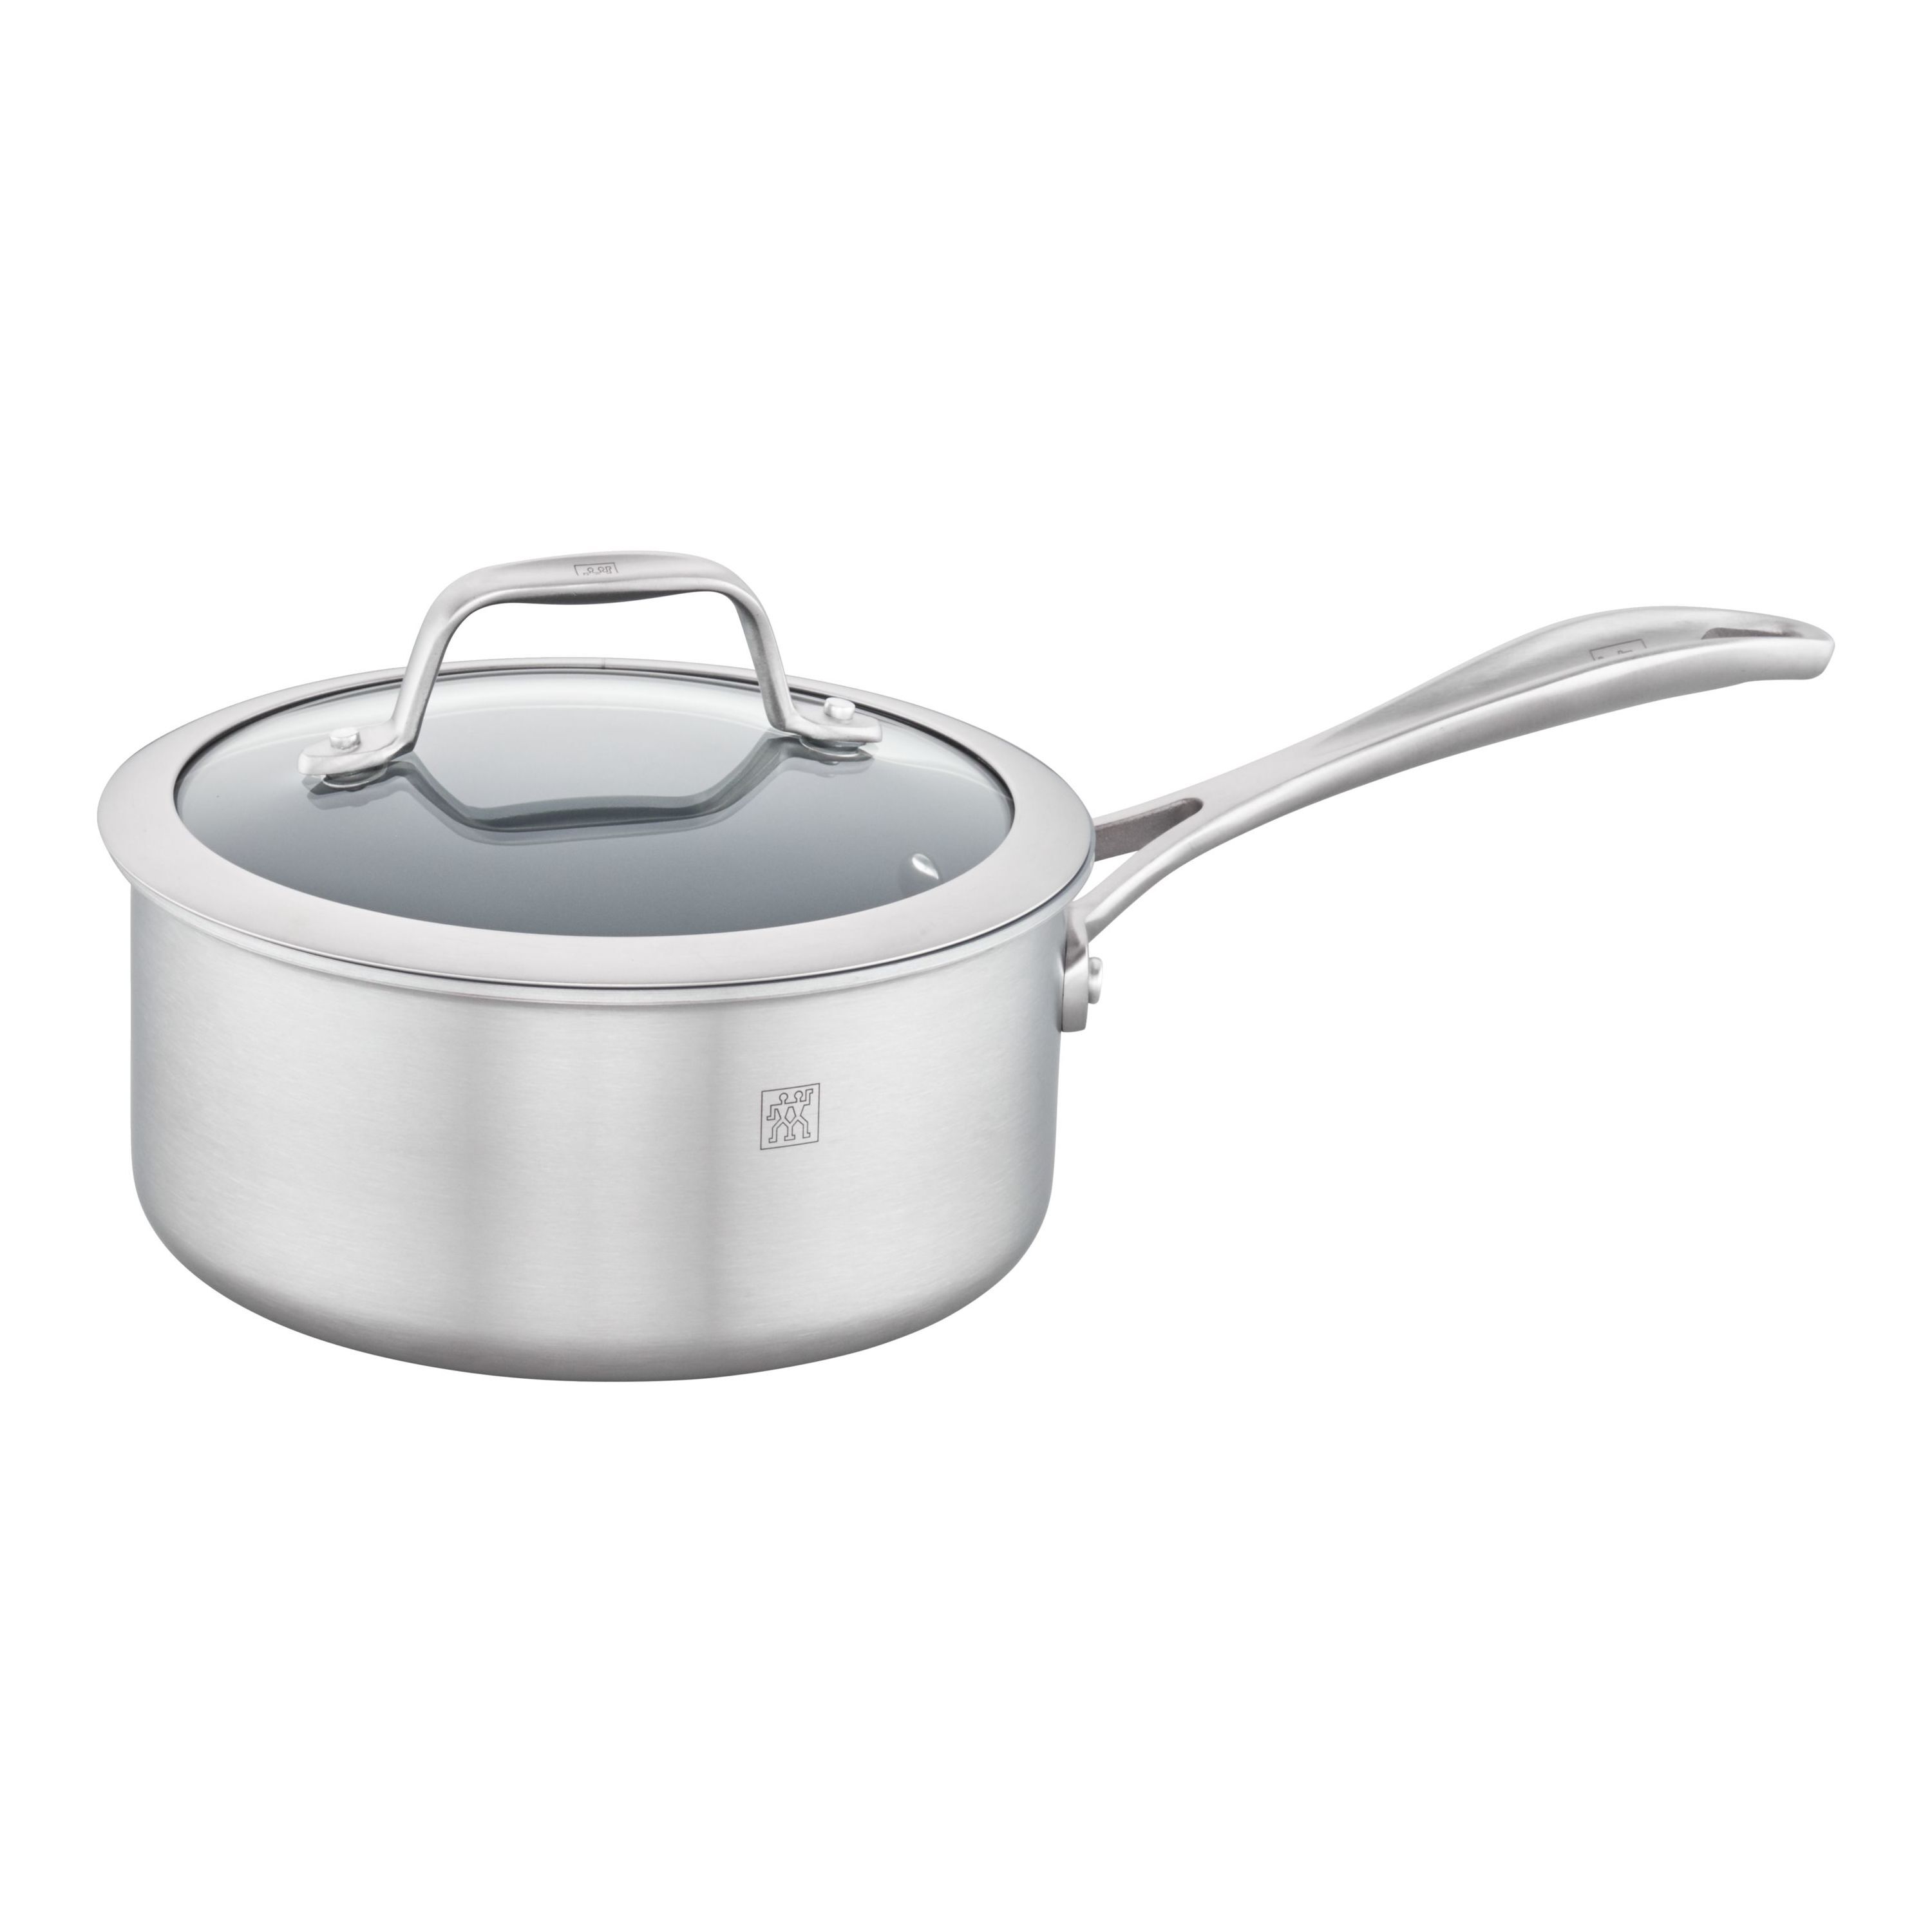 2 qt Sauce pan, 18/10 Stainless Steel